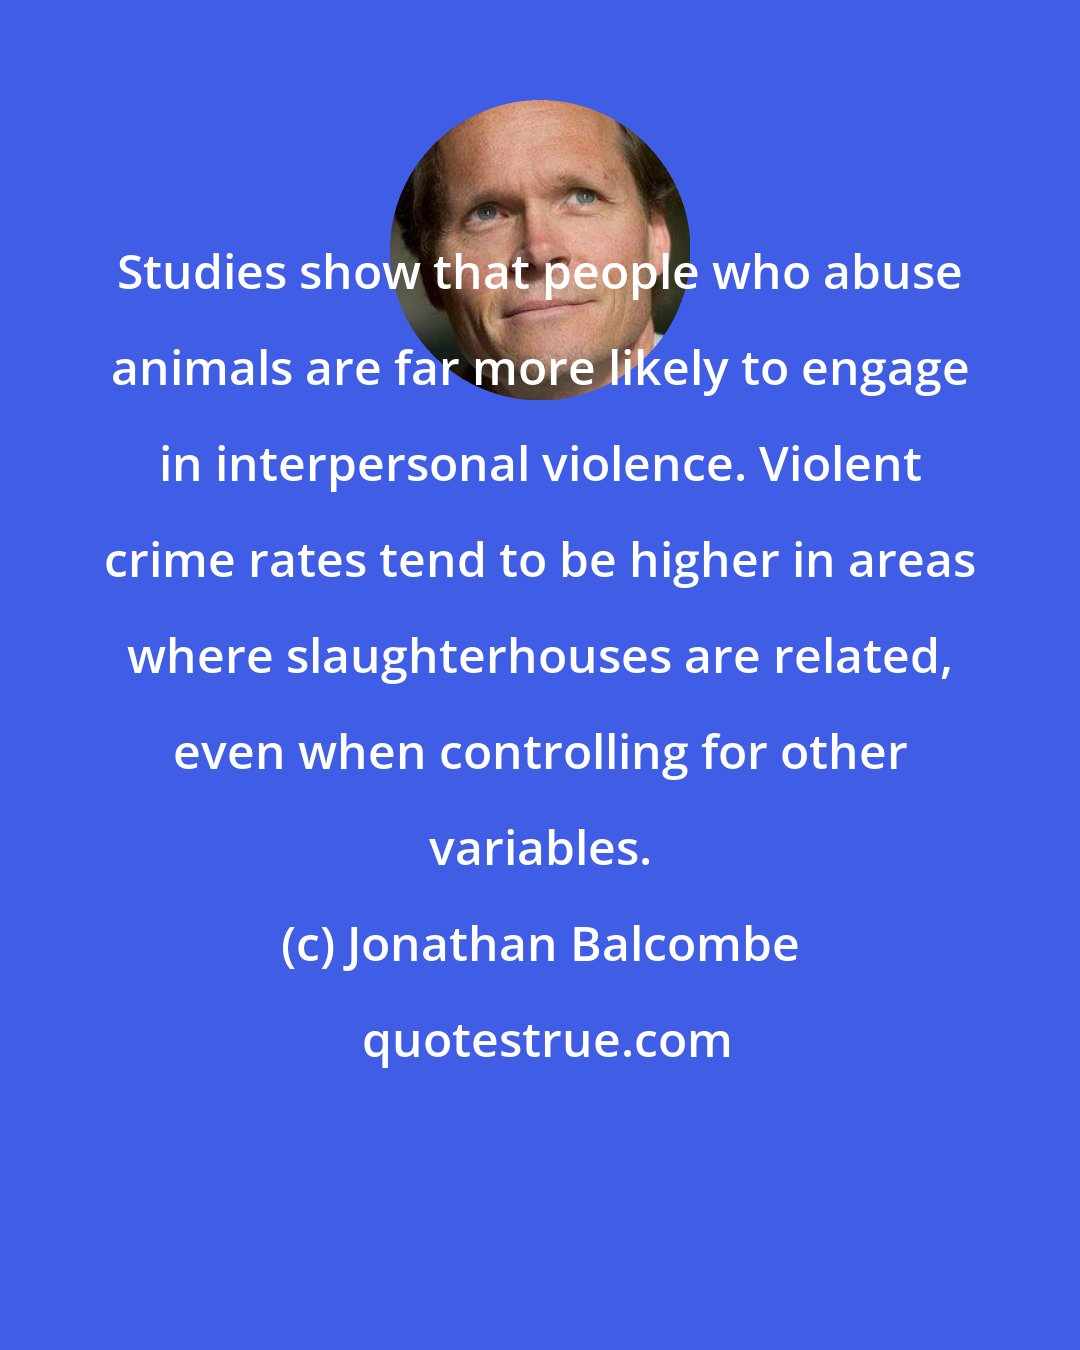 Jonathan Balcombe: Studies show that people who abuse animals are far more likely to engage in interpersonal violence. Violent crime rates tend to be higher in areas where slaughterhouses are related, even when controlling for other variables.